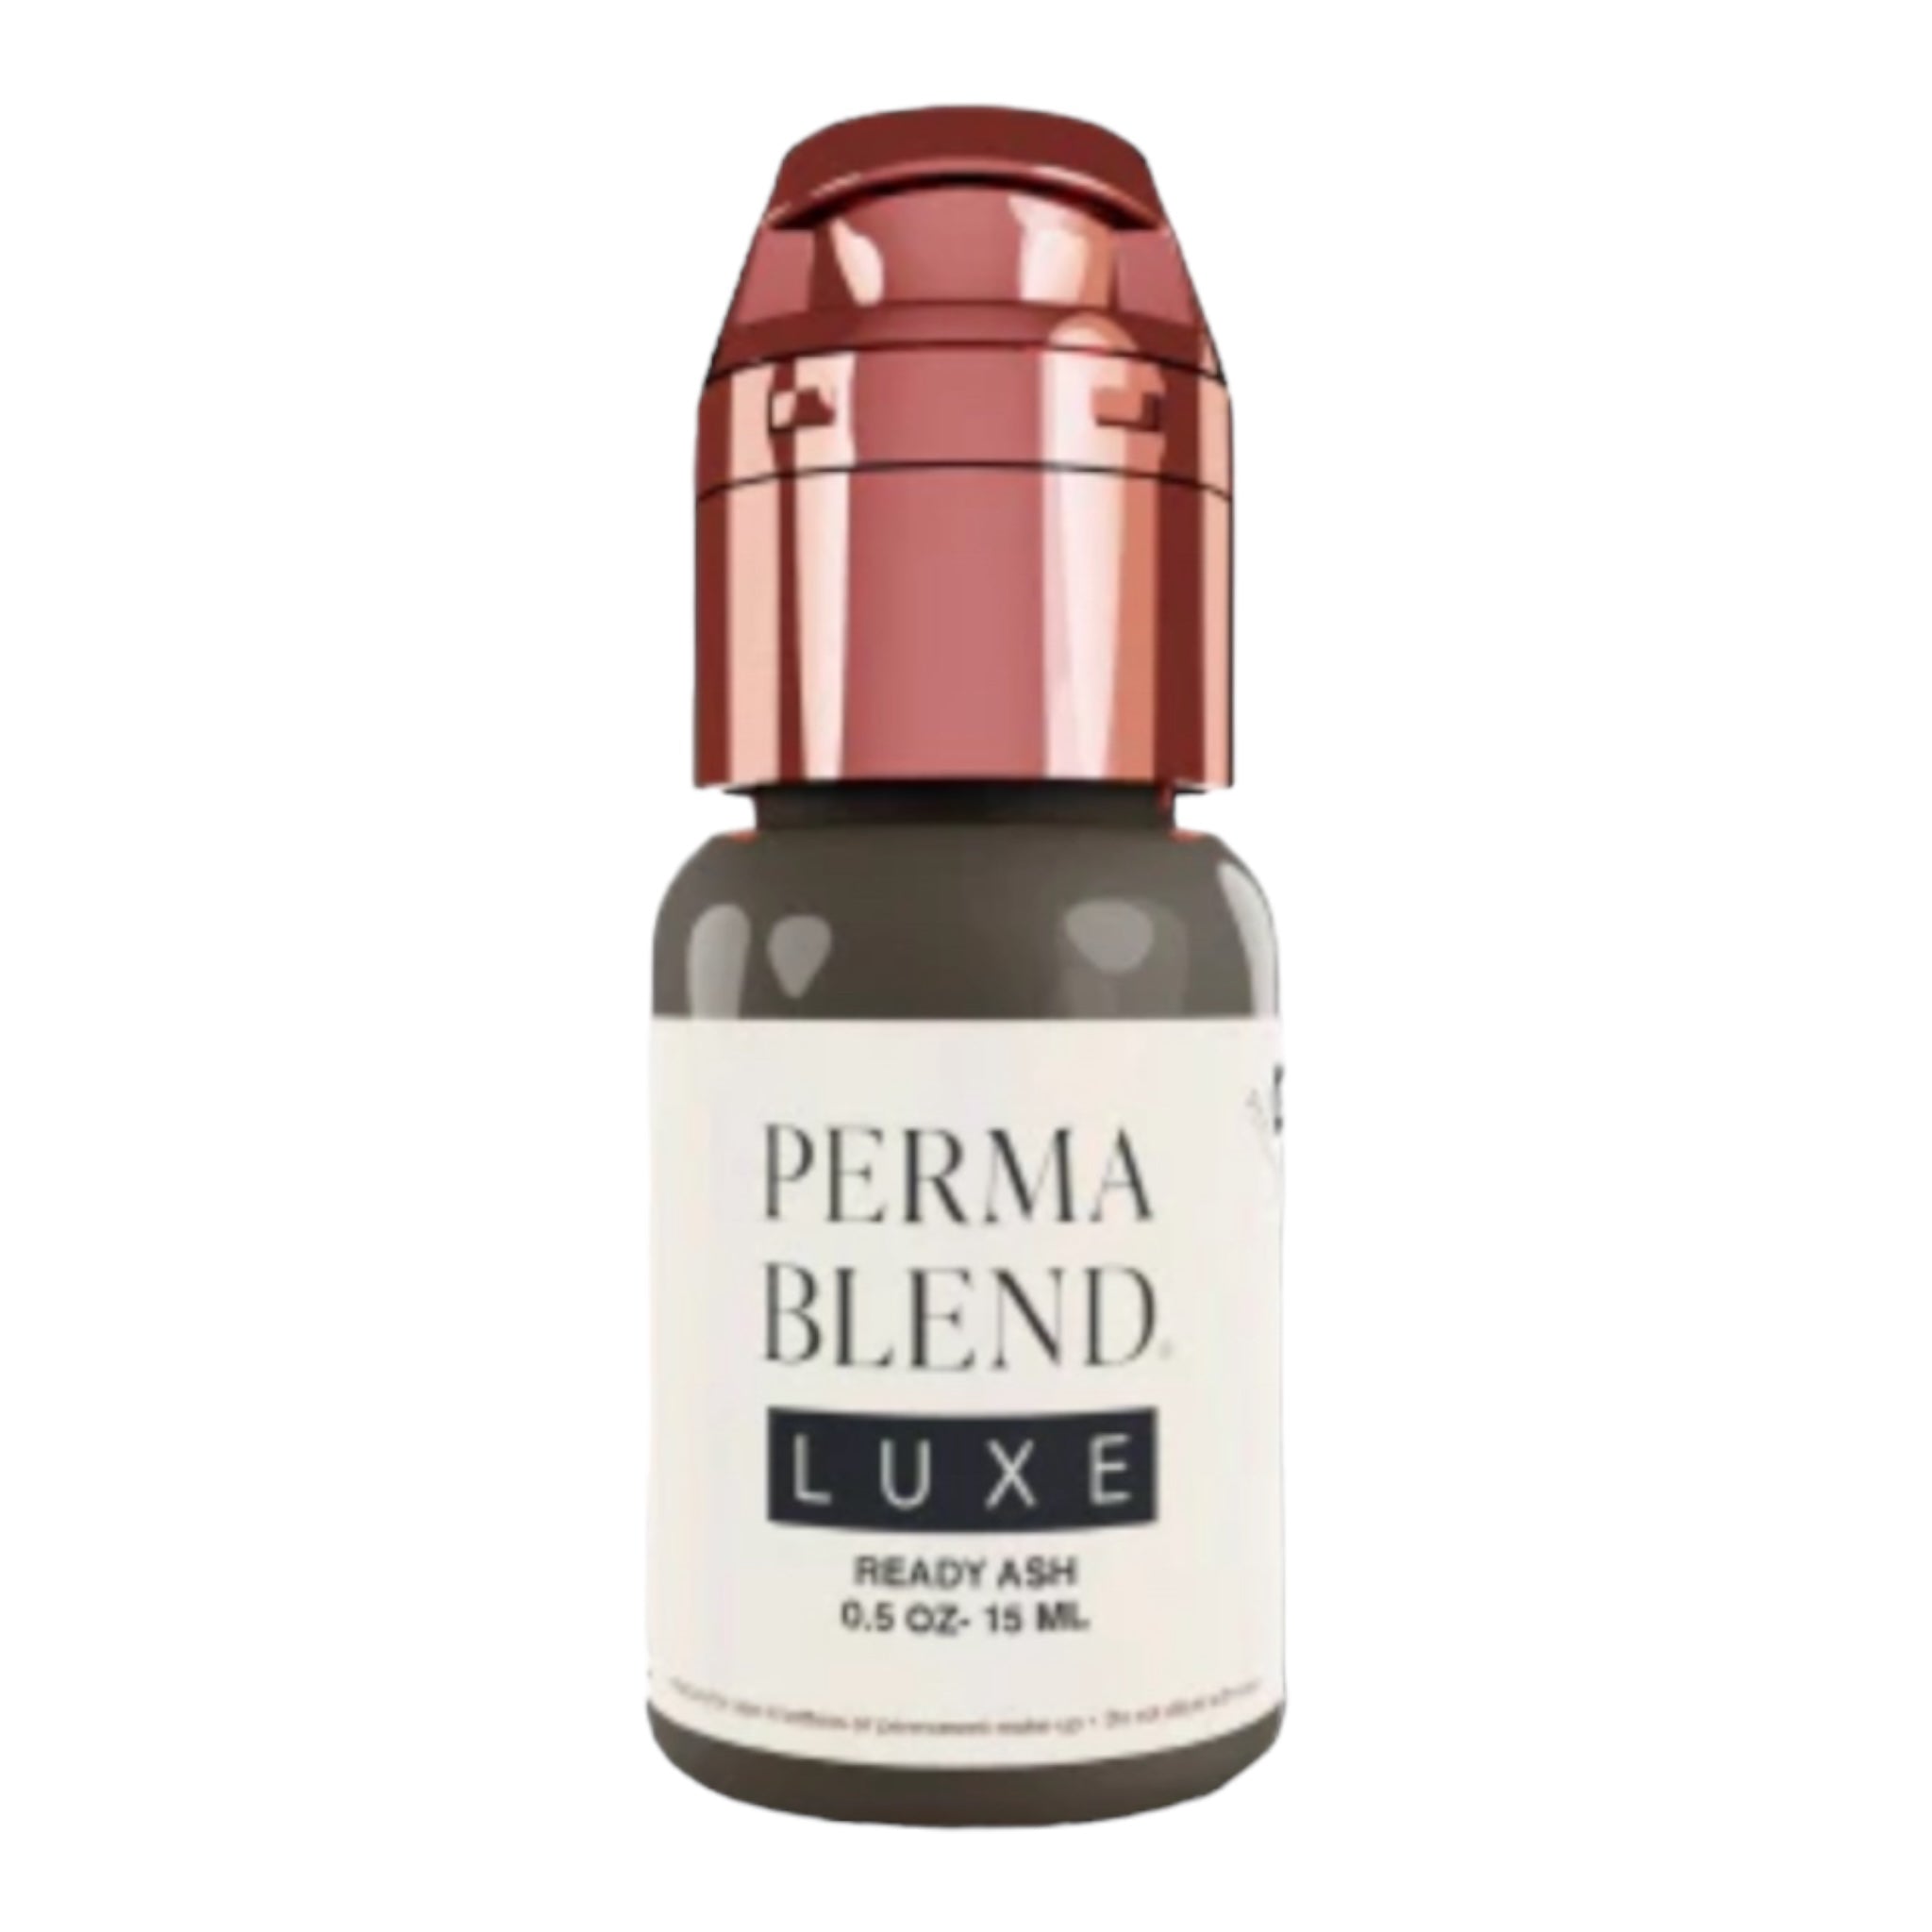 Encre Maquillage Perma Blend Luxe 15ml - Ready ASH